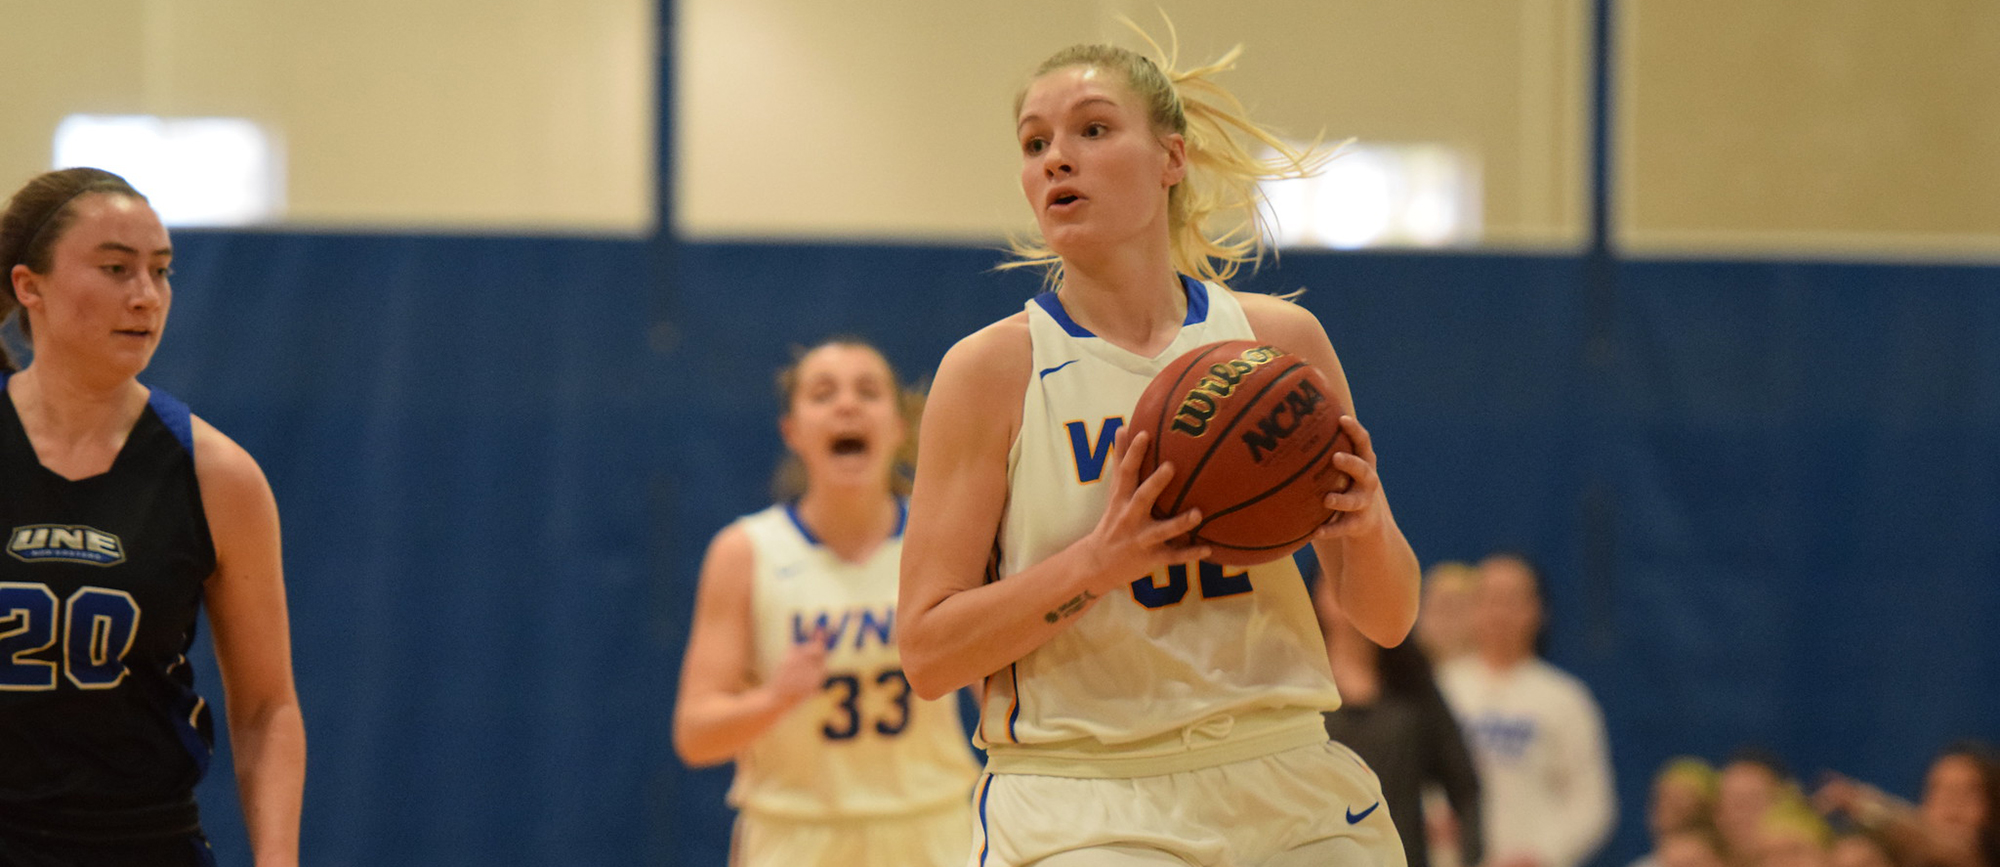 Courtney Carlson scored 17 points and grabbed seven rebounds against the University of New England on Thursday evening. (Photo by Rachael Margossian)